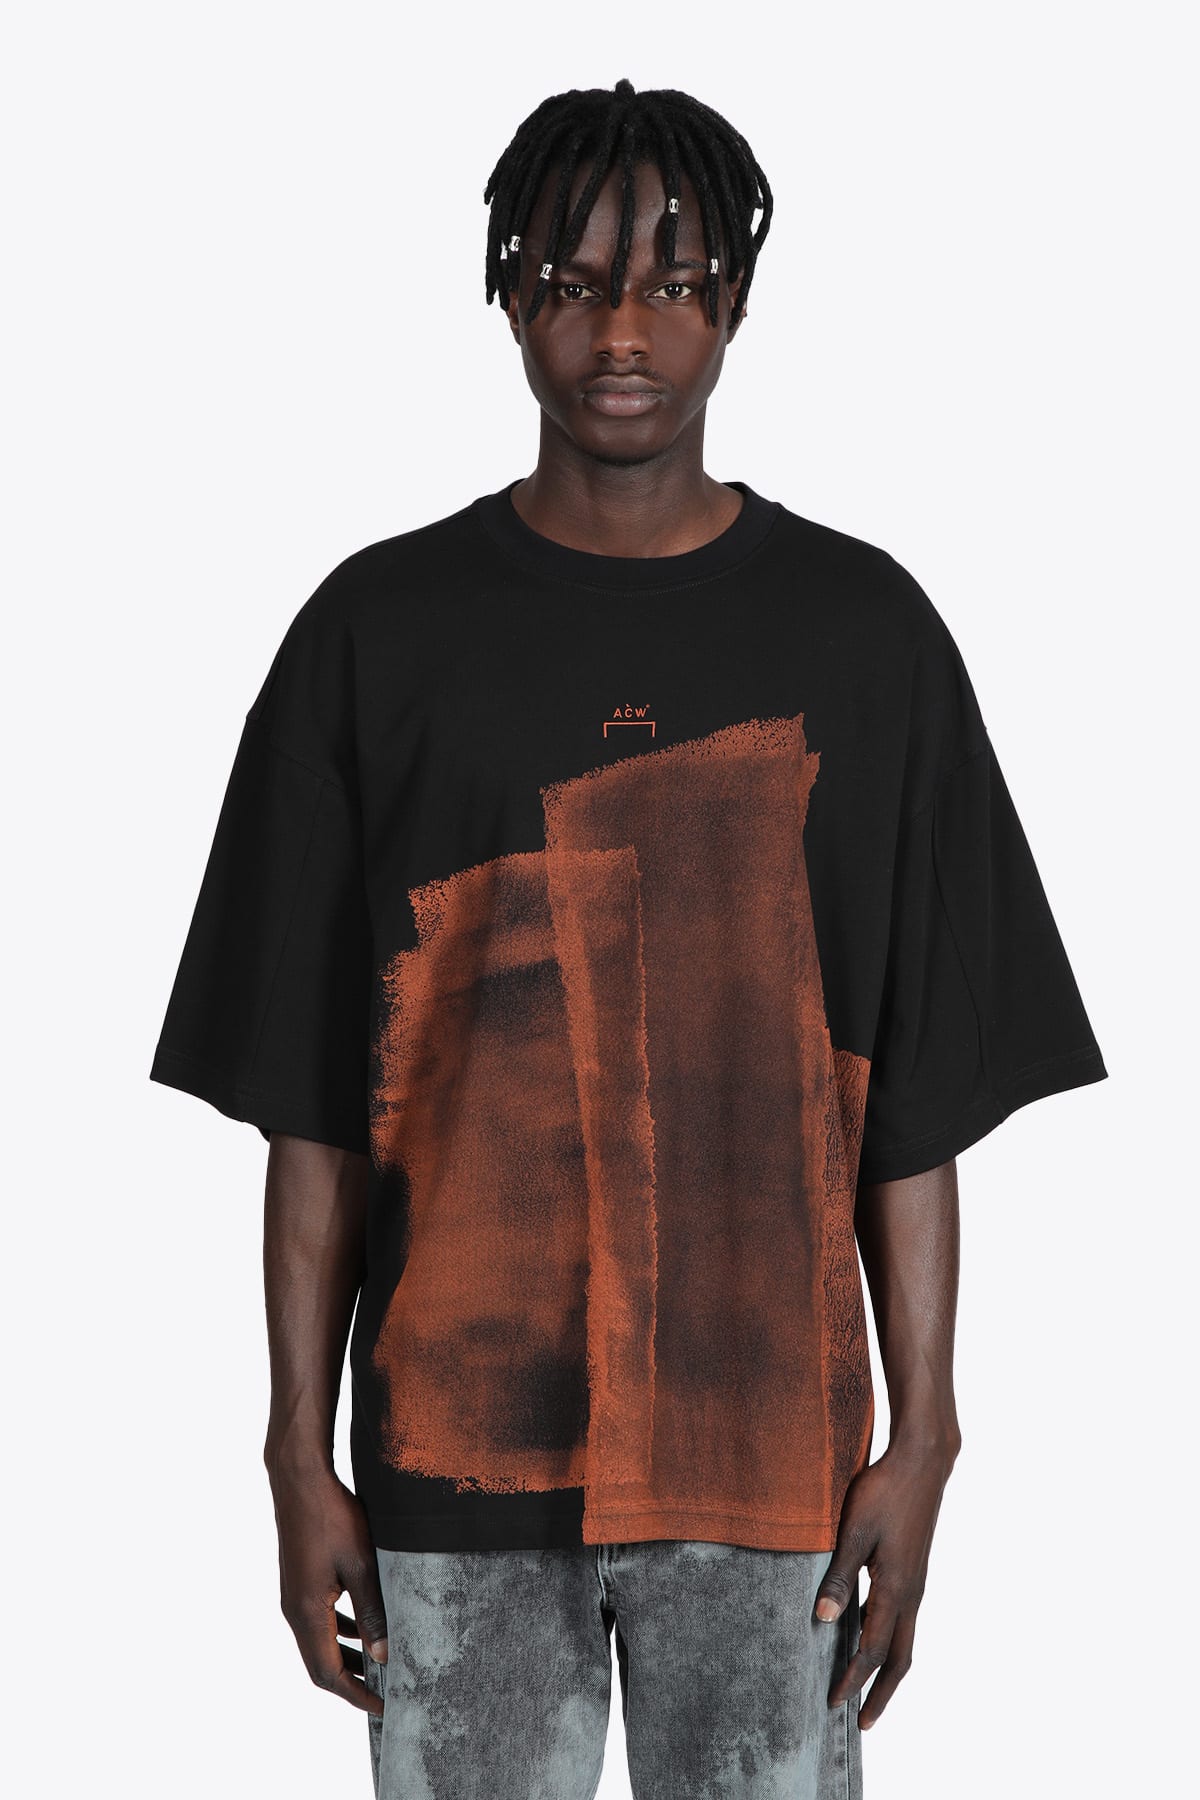 A-COLD-WALL Knitted Collage T-shirt Black cotton t-shirt with orange abstract screen print